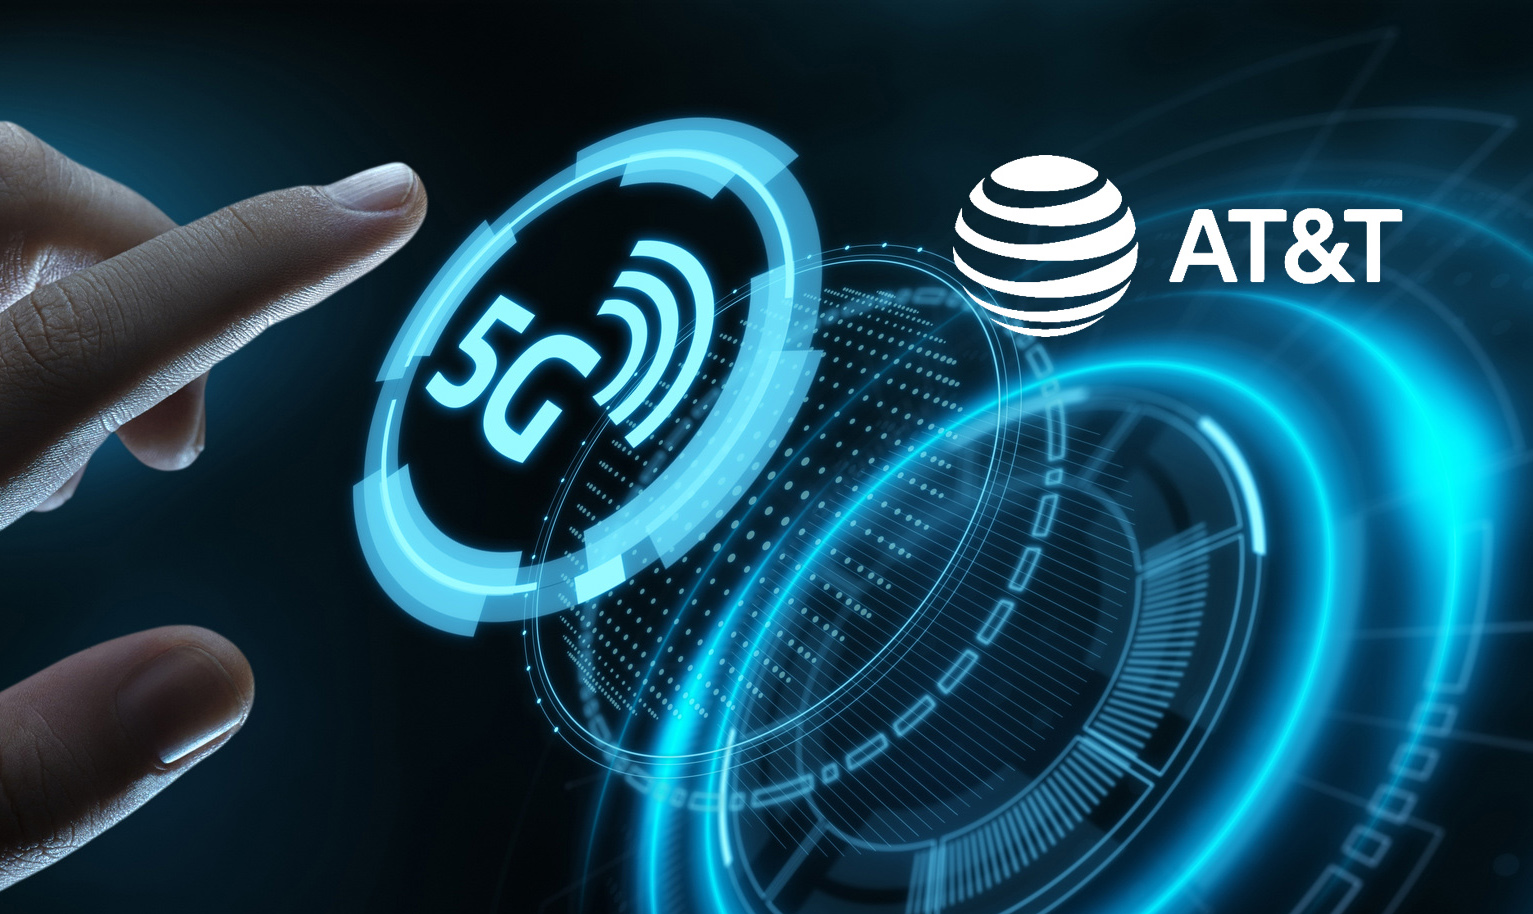 AT&T red 5G